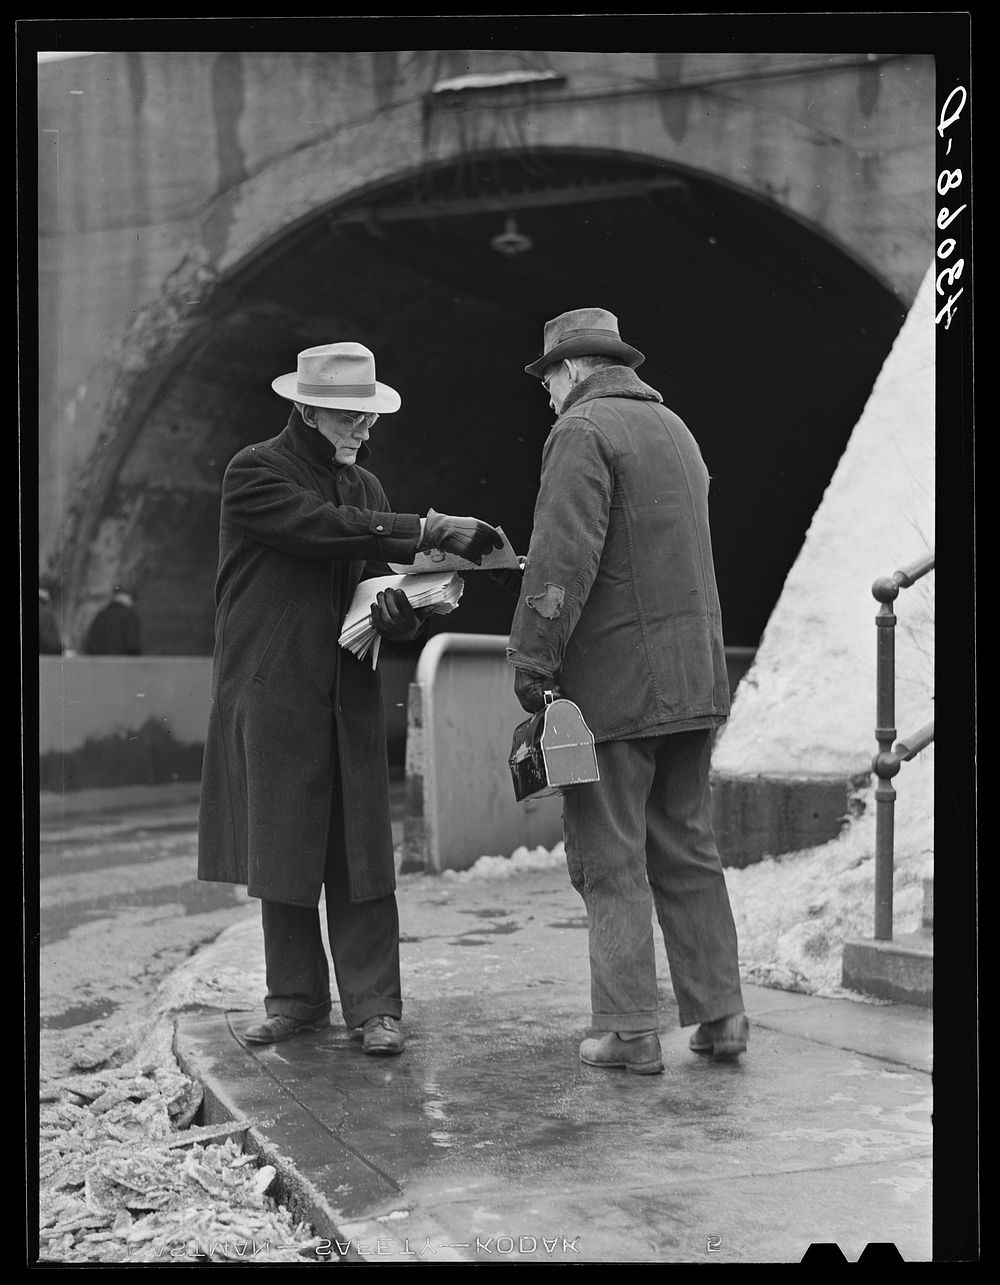 Union member distributing "Steel Labor" near the entrance the the Jones and Laughlin Steel Corporation in Aliquippa…